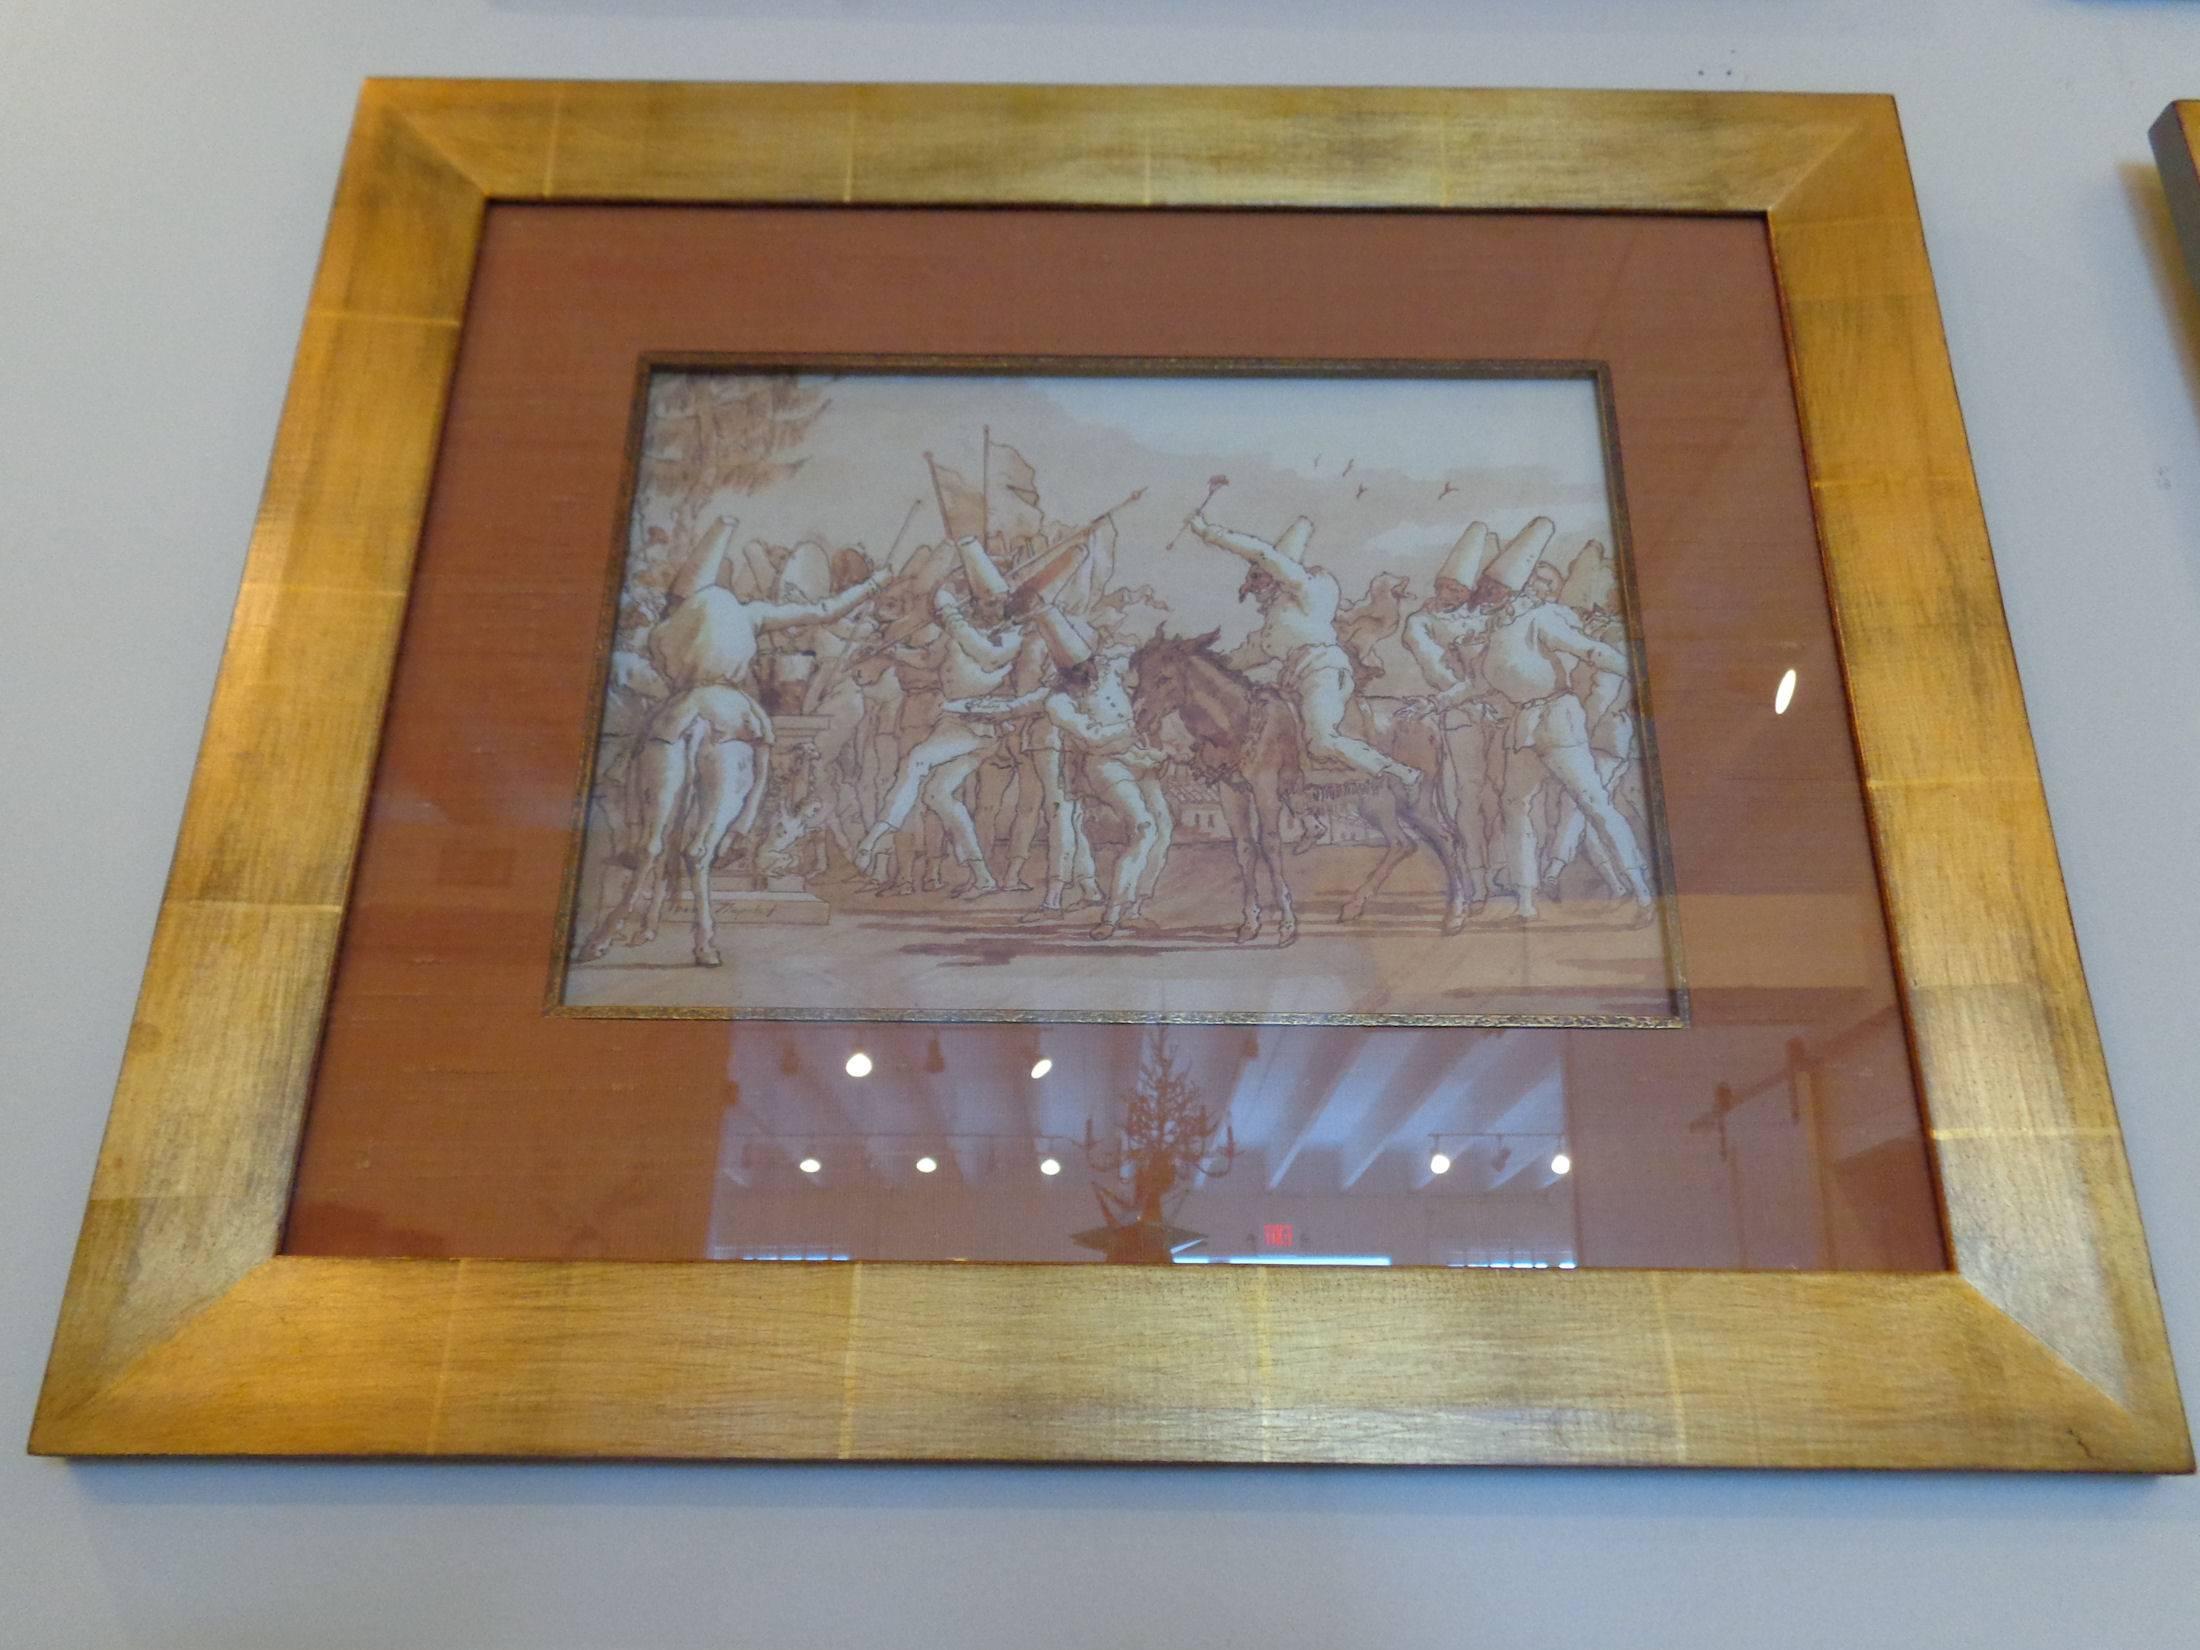 Renaissance Punchinello Prints of Drawings by Domenico Tiepolo